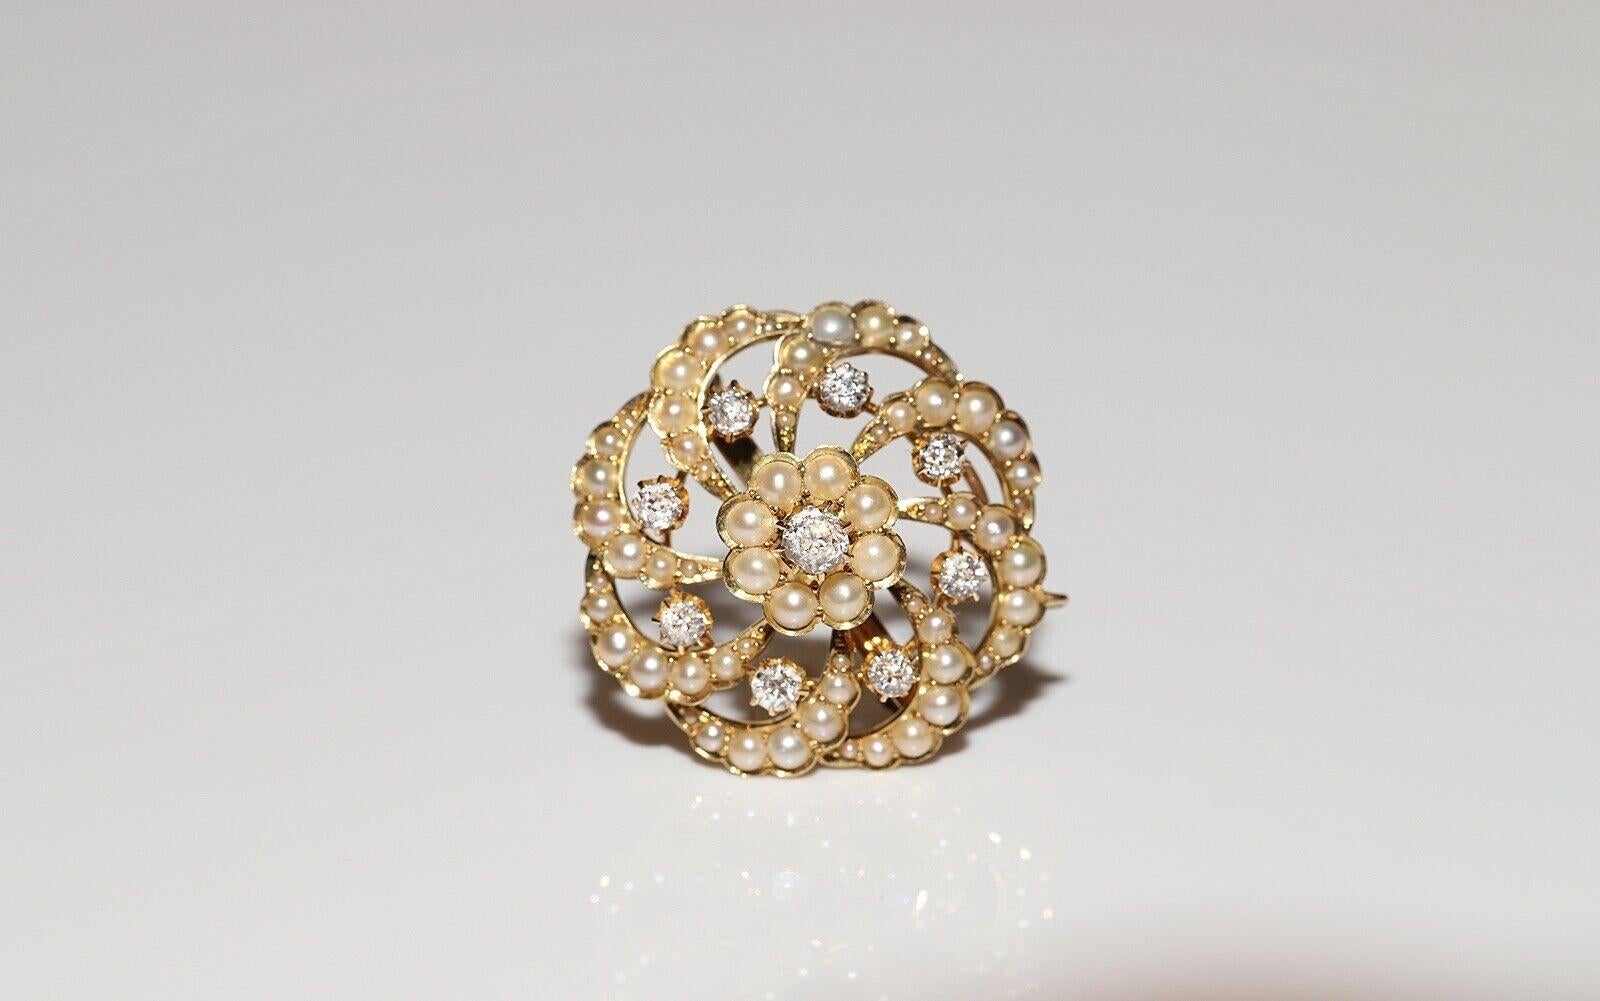  Antique Circa 1900s 18k Gold Natural Old Cut Diamond Pearl Decorated Brooch For Sale 2